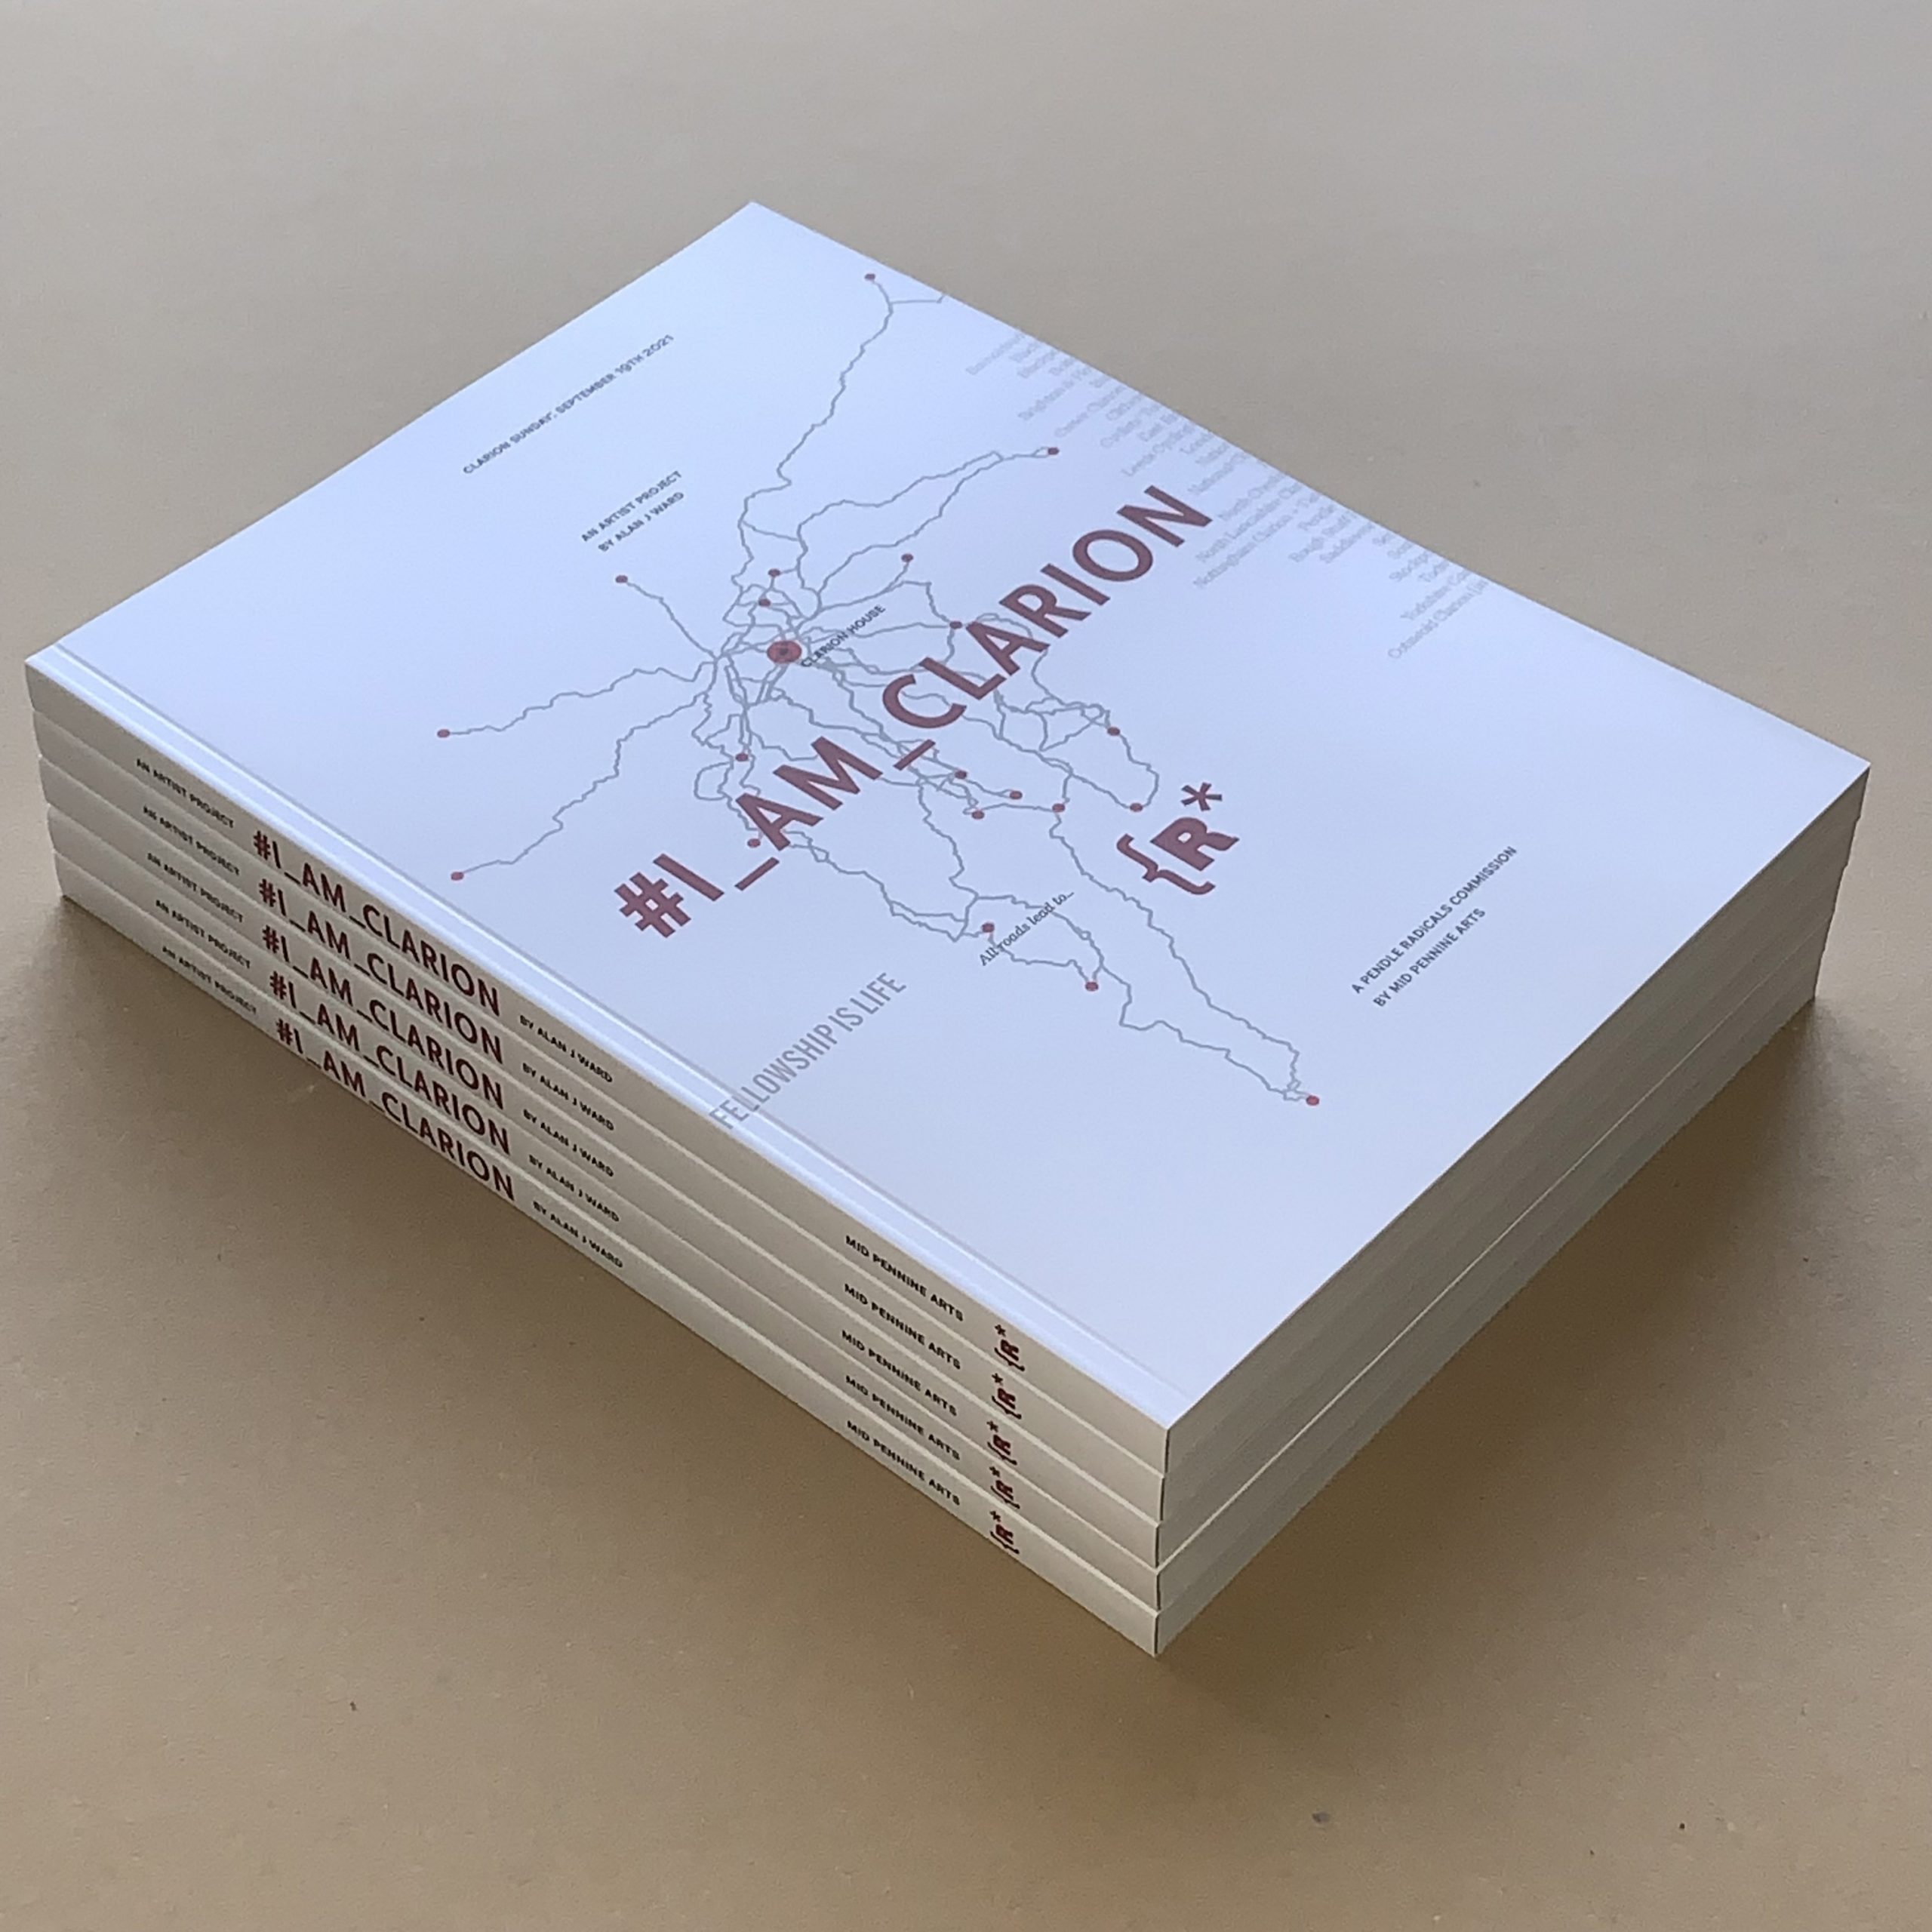 #i_am_clarion publication has landed and website links have been updated